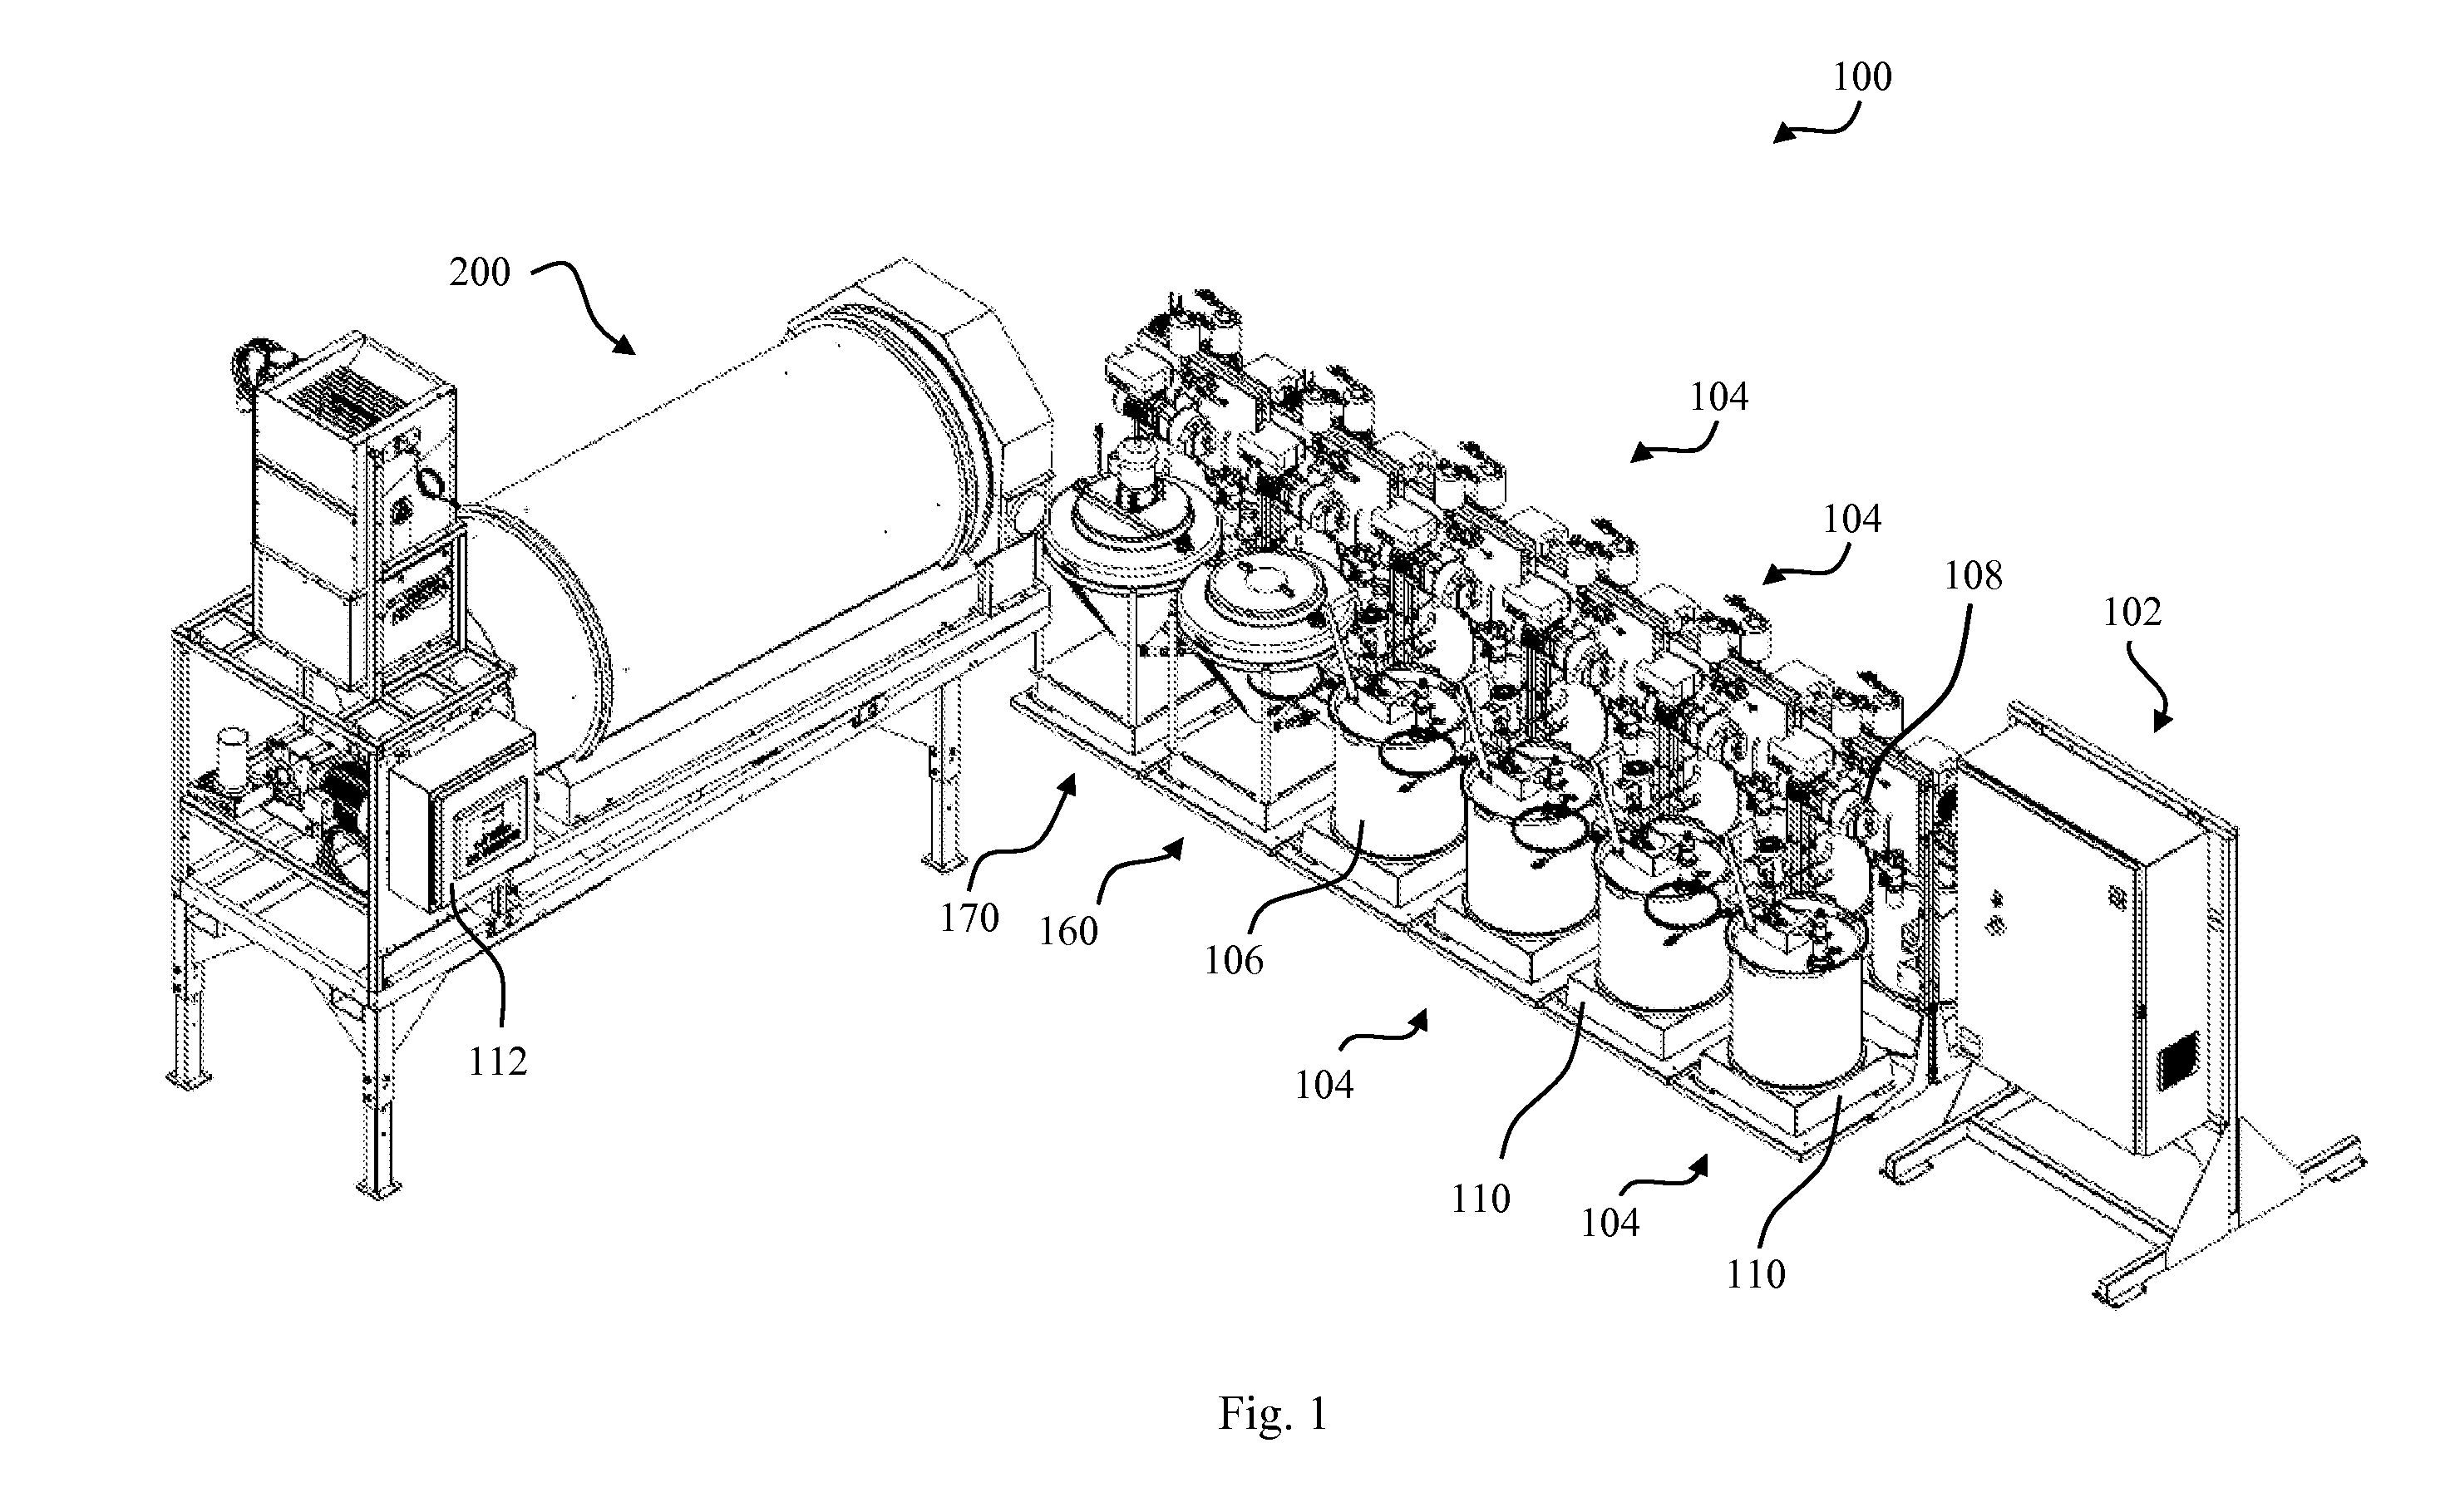 Seed treatment systems and methods